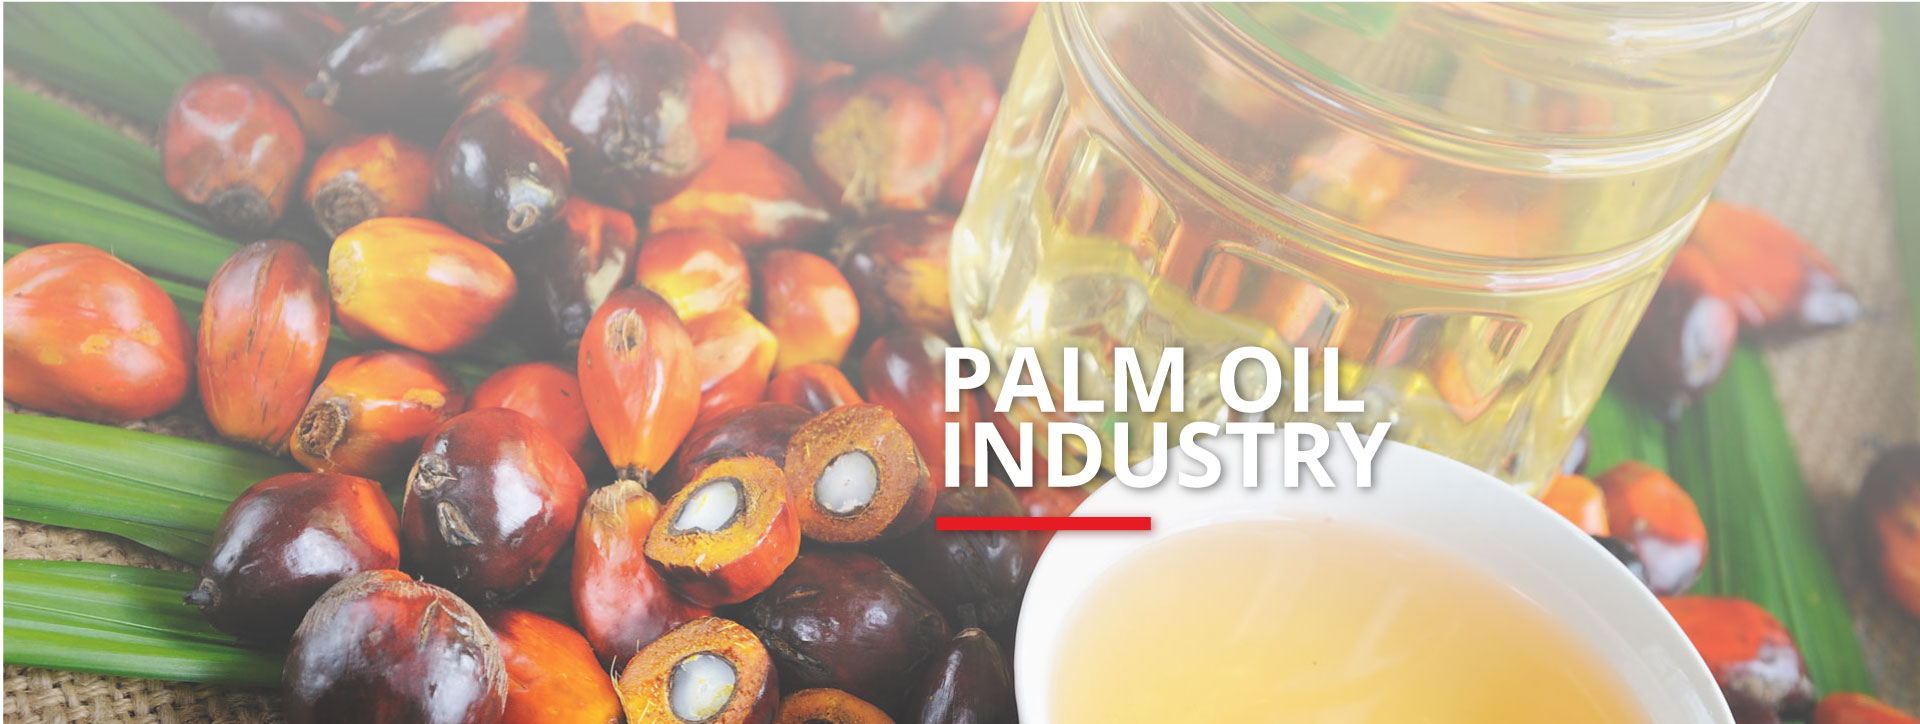 Palm Oil Industry Banner